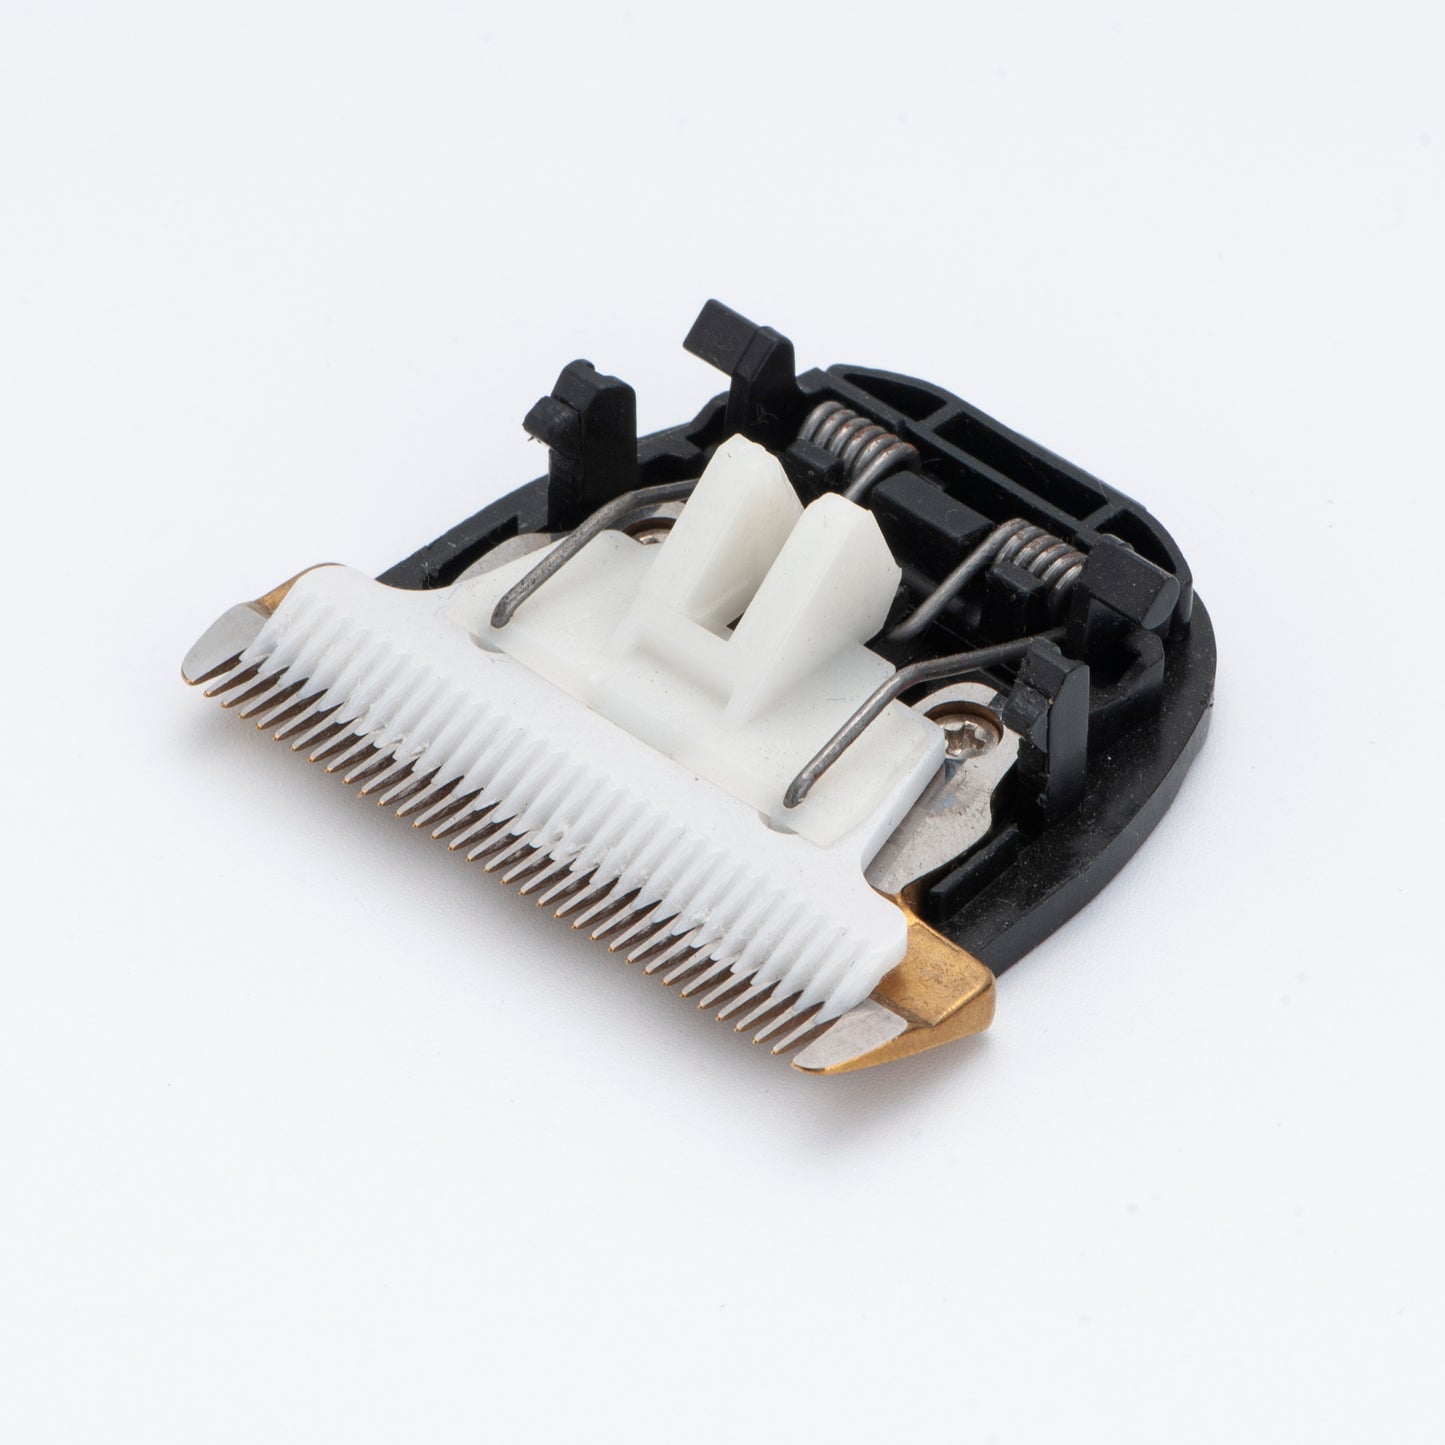 35-Tooth Detachable Clipper Blade Replacement, Original Cutter Head